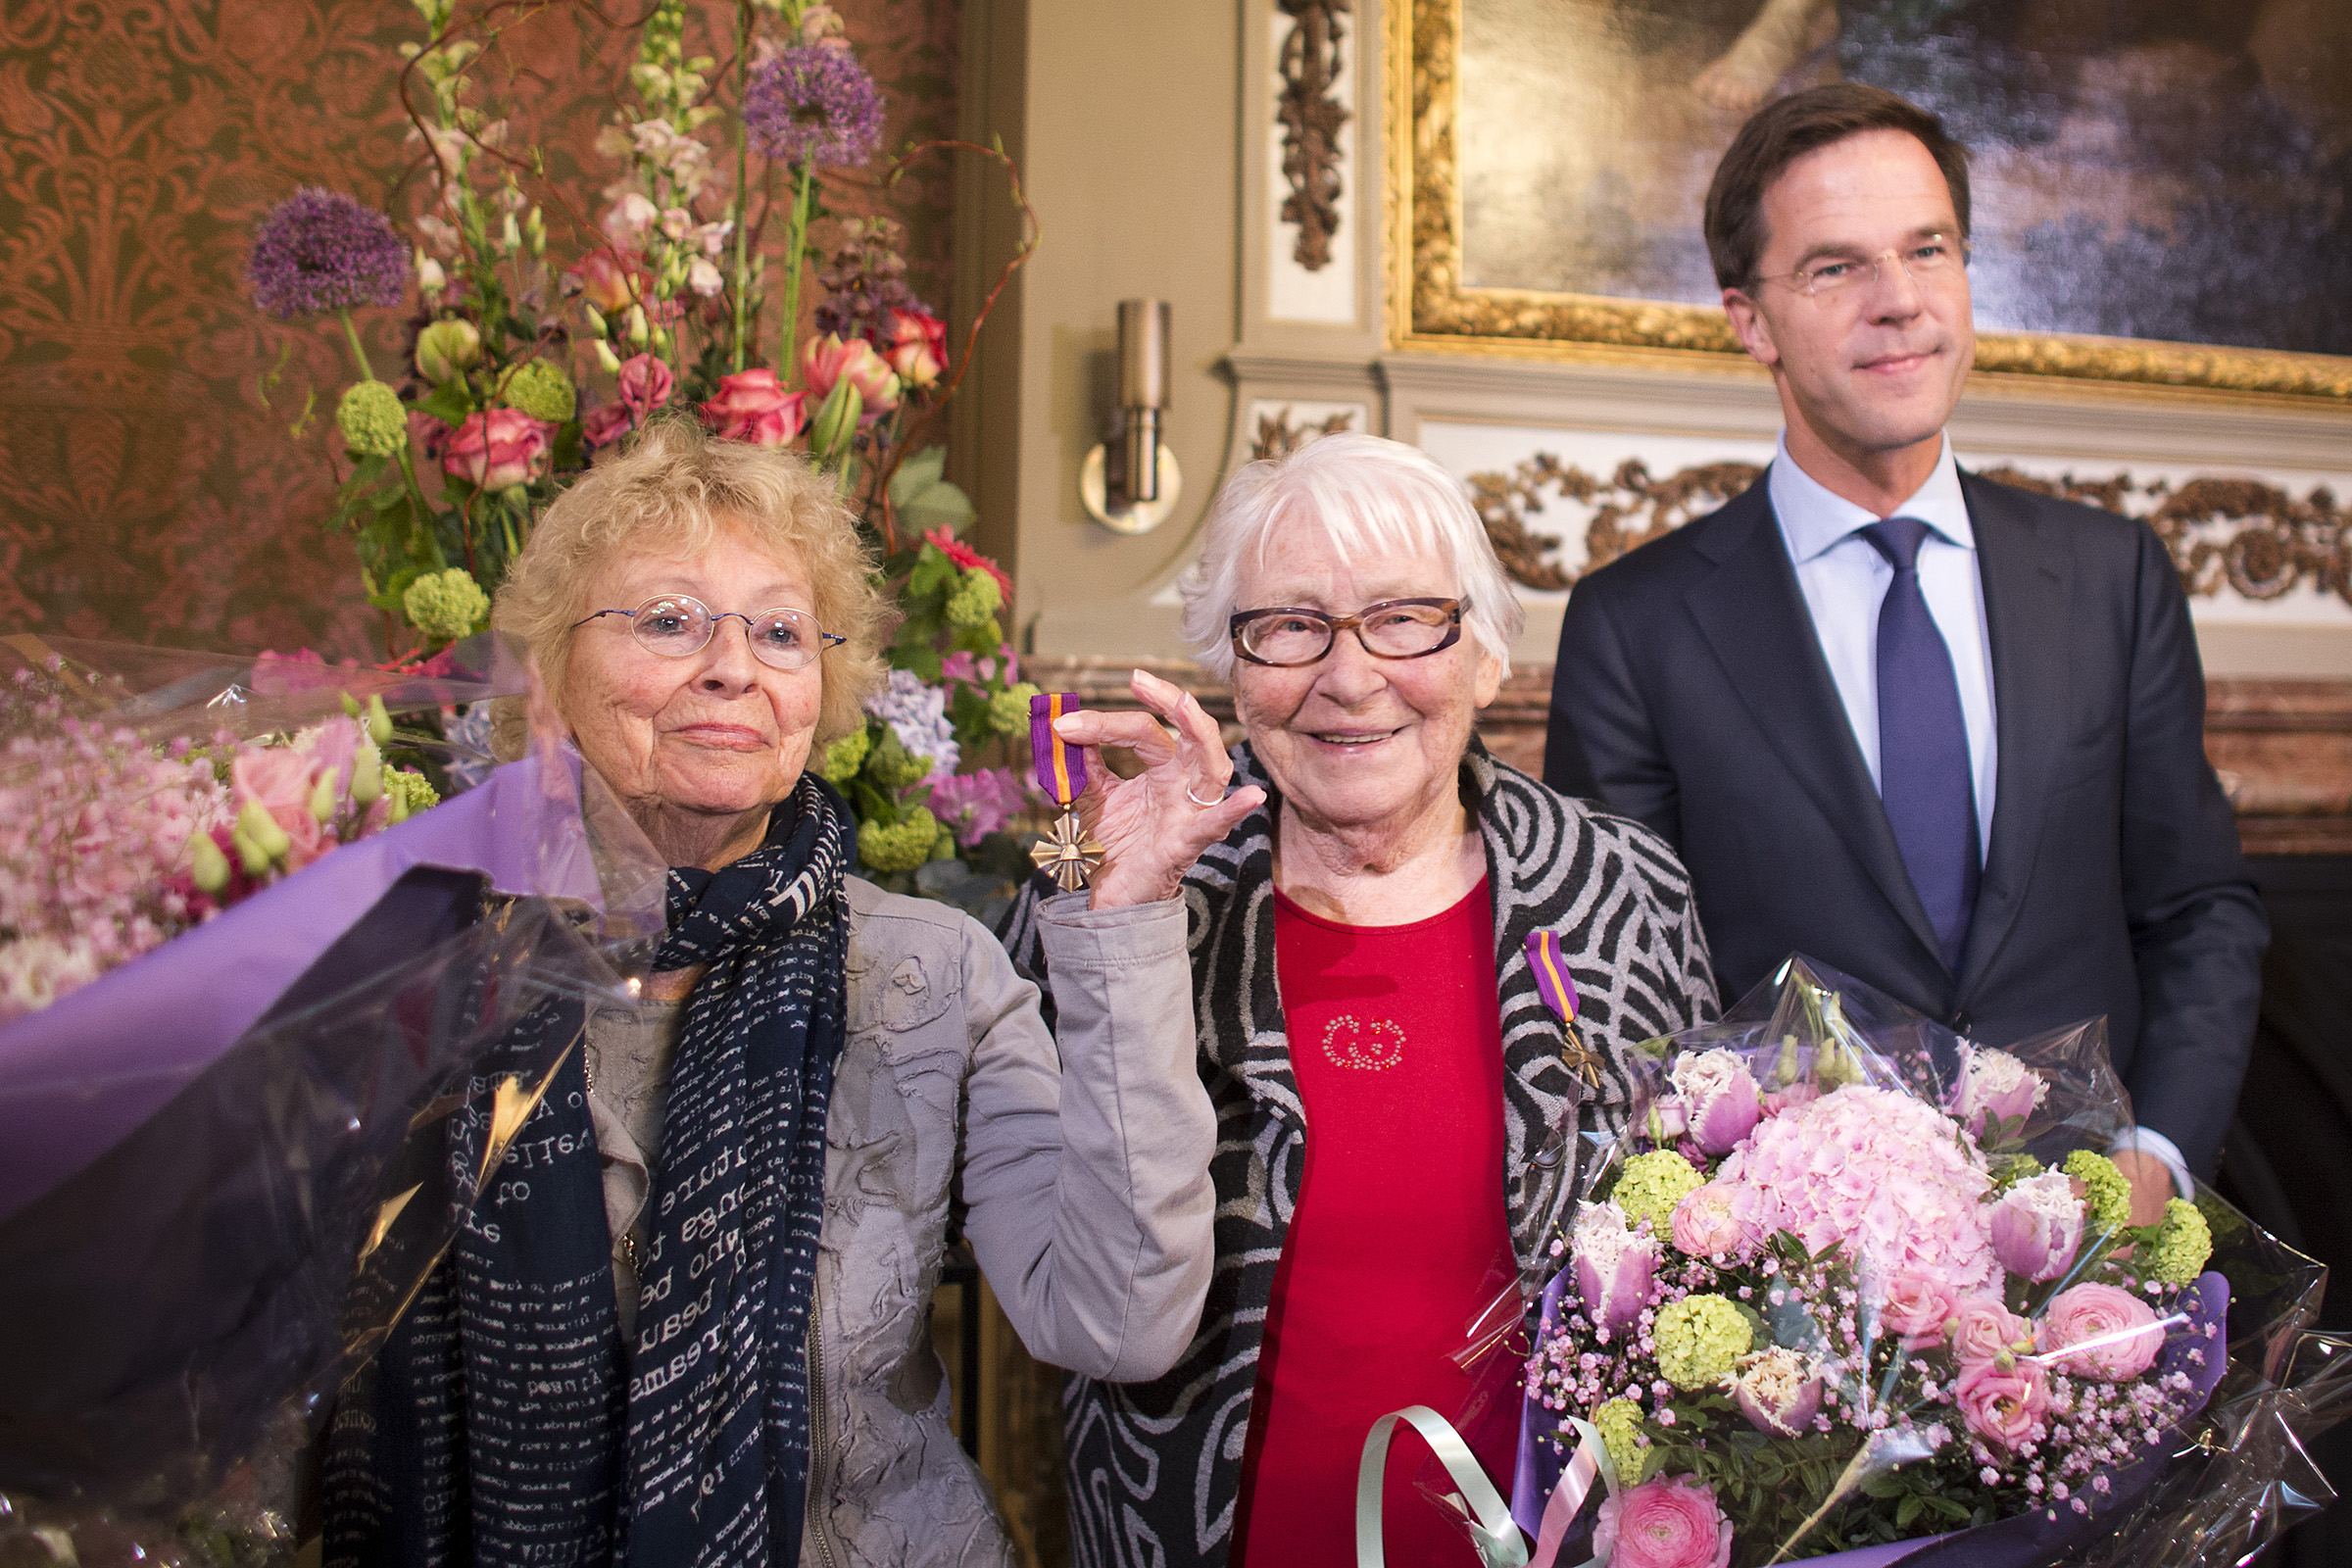 In 2014, Ms. Freddie Oversteegen, left, and her sister, Truus, were awarded the Mobilization War Cross by Mark Rutte, the Dutch prime minister. (Dutch Ministry of Defense)